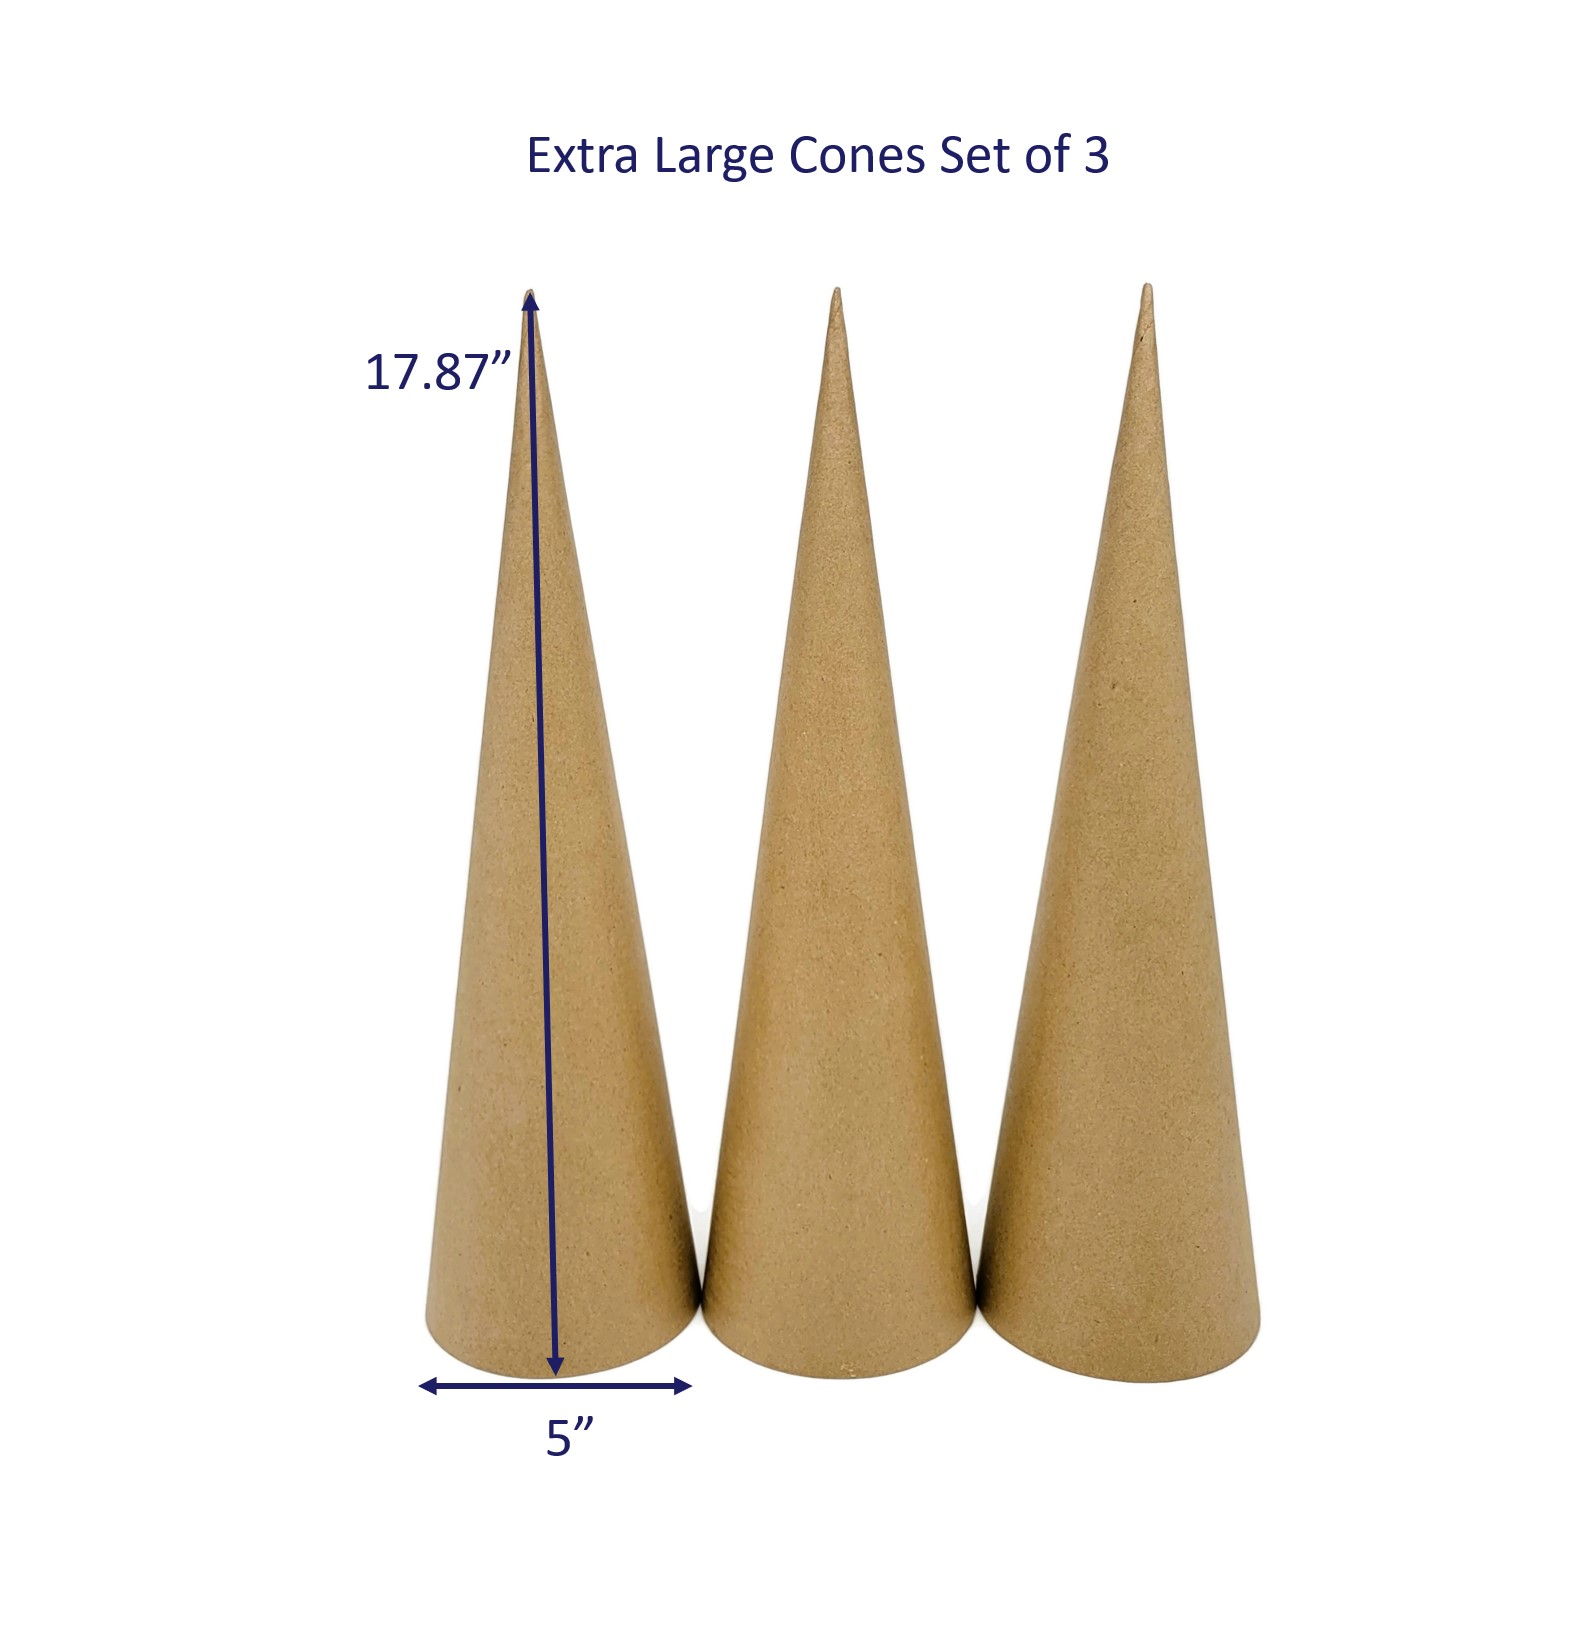 AllStellar Paper Mache Cones Open Bottom 17.87x5 in. Set of 3 (X-Large) - for DIY Art Projects, Crafts and Decorations!